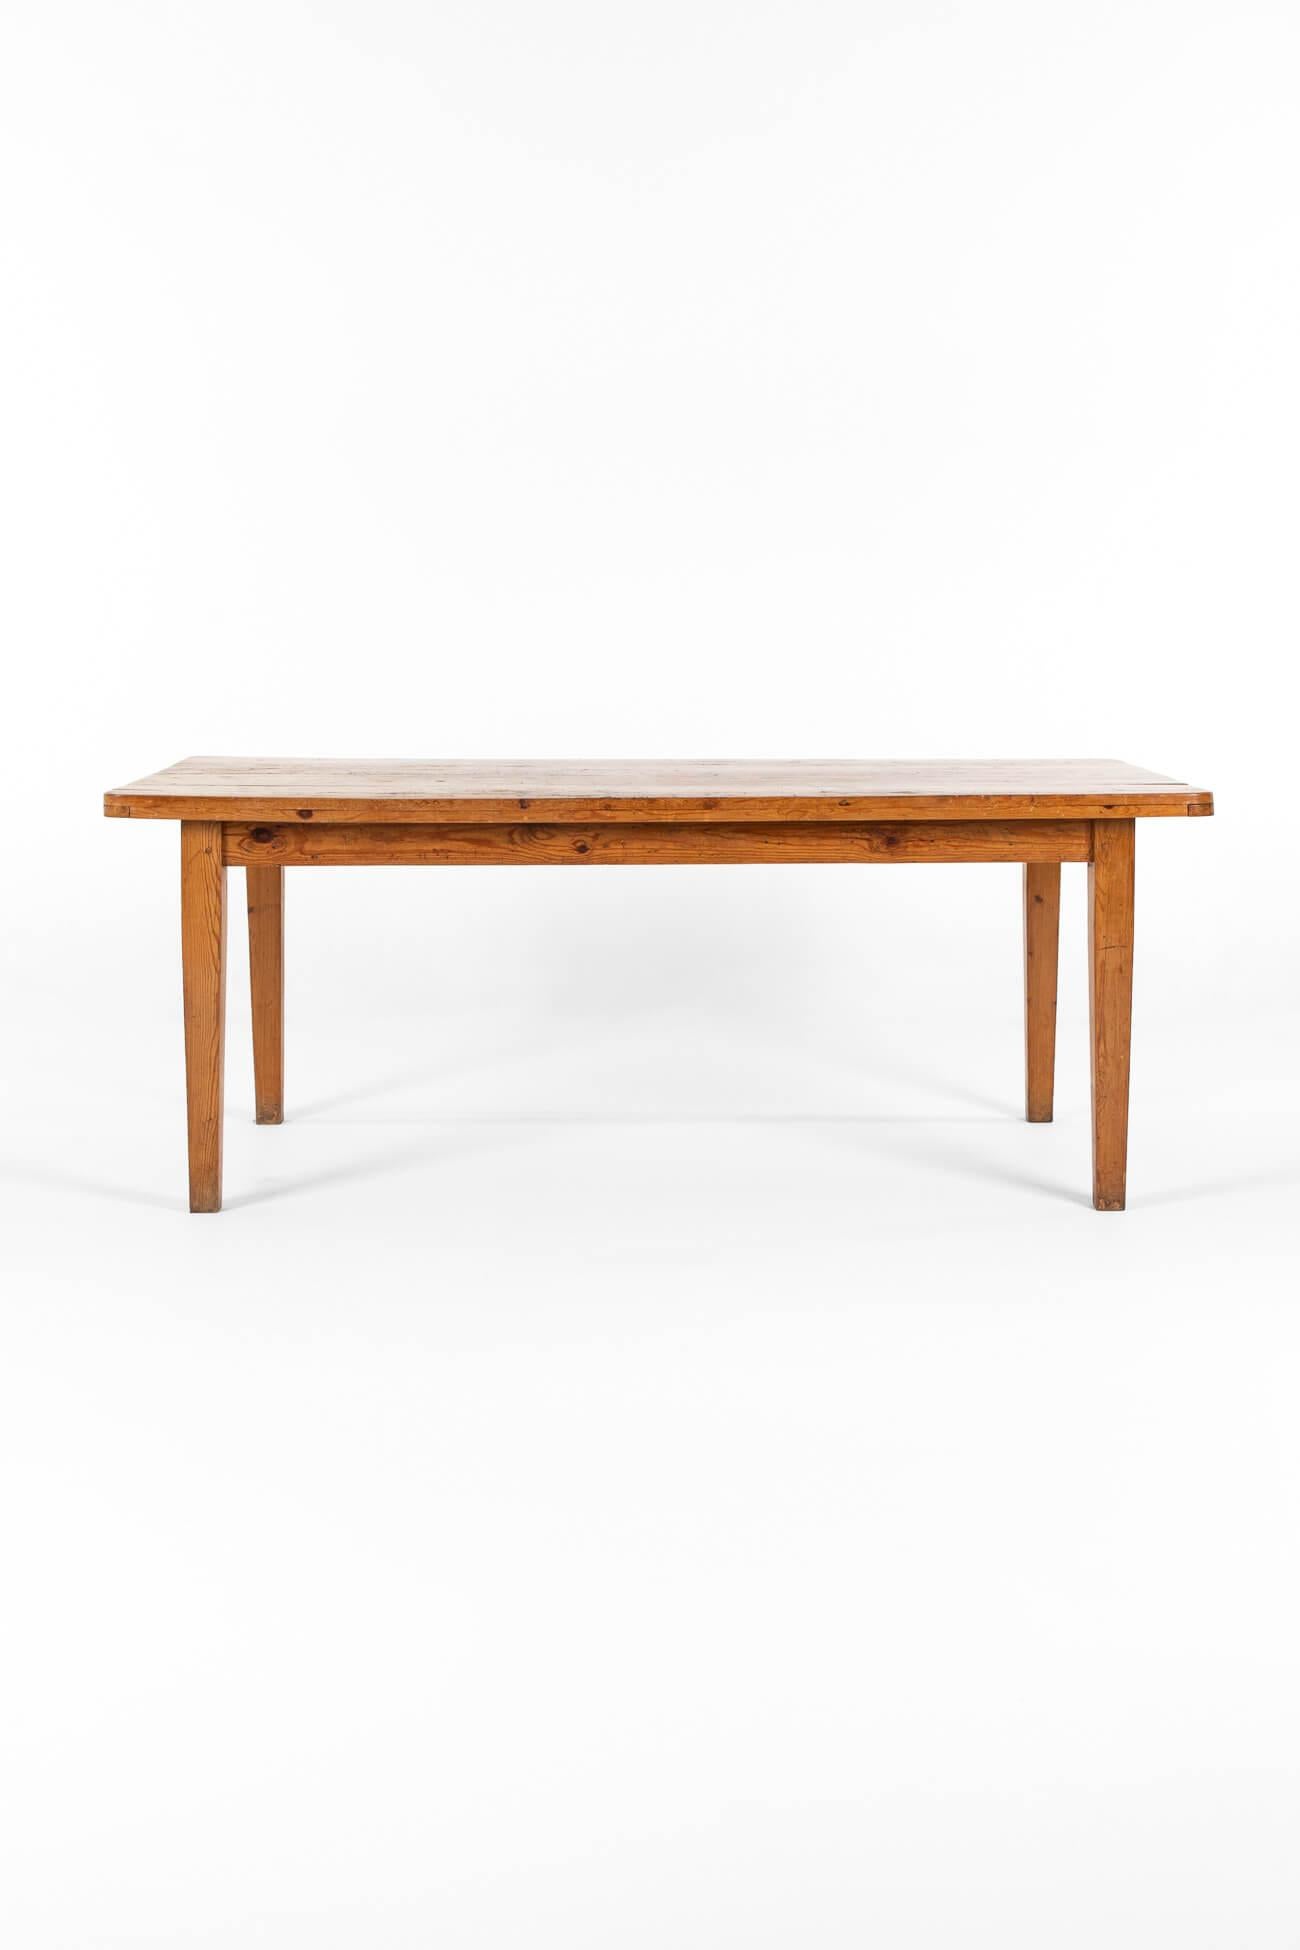 A French farmhouse table in pine with wonderful character and patina.

It features a thick oversized top with rounded corners over a peripheral apron, raised on four tapered legs.

One of the best tables we have had in the collection.

France, circa